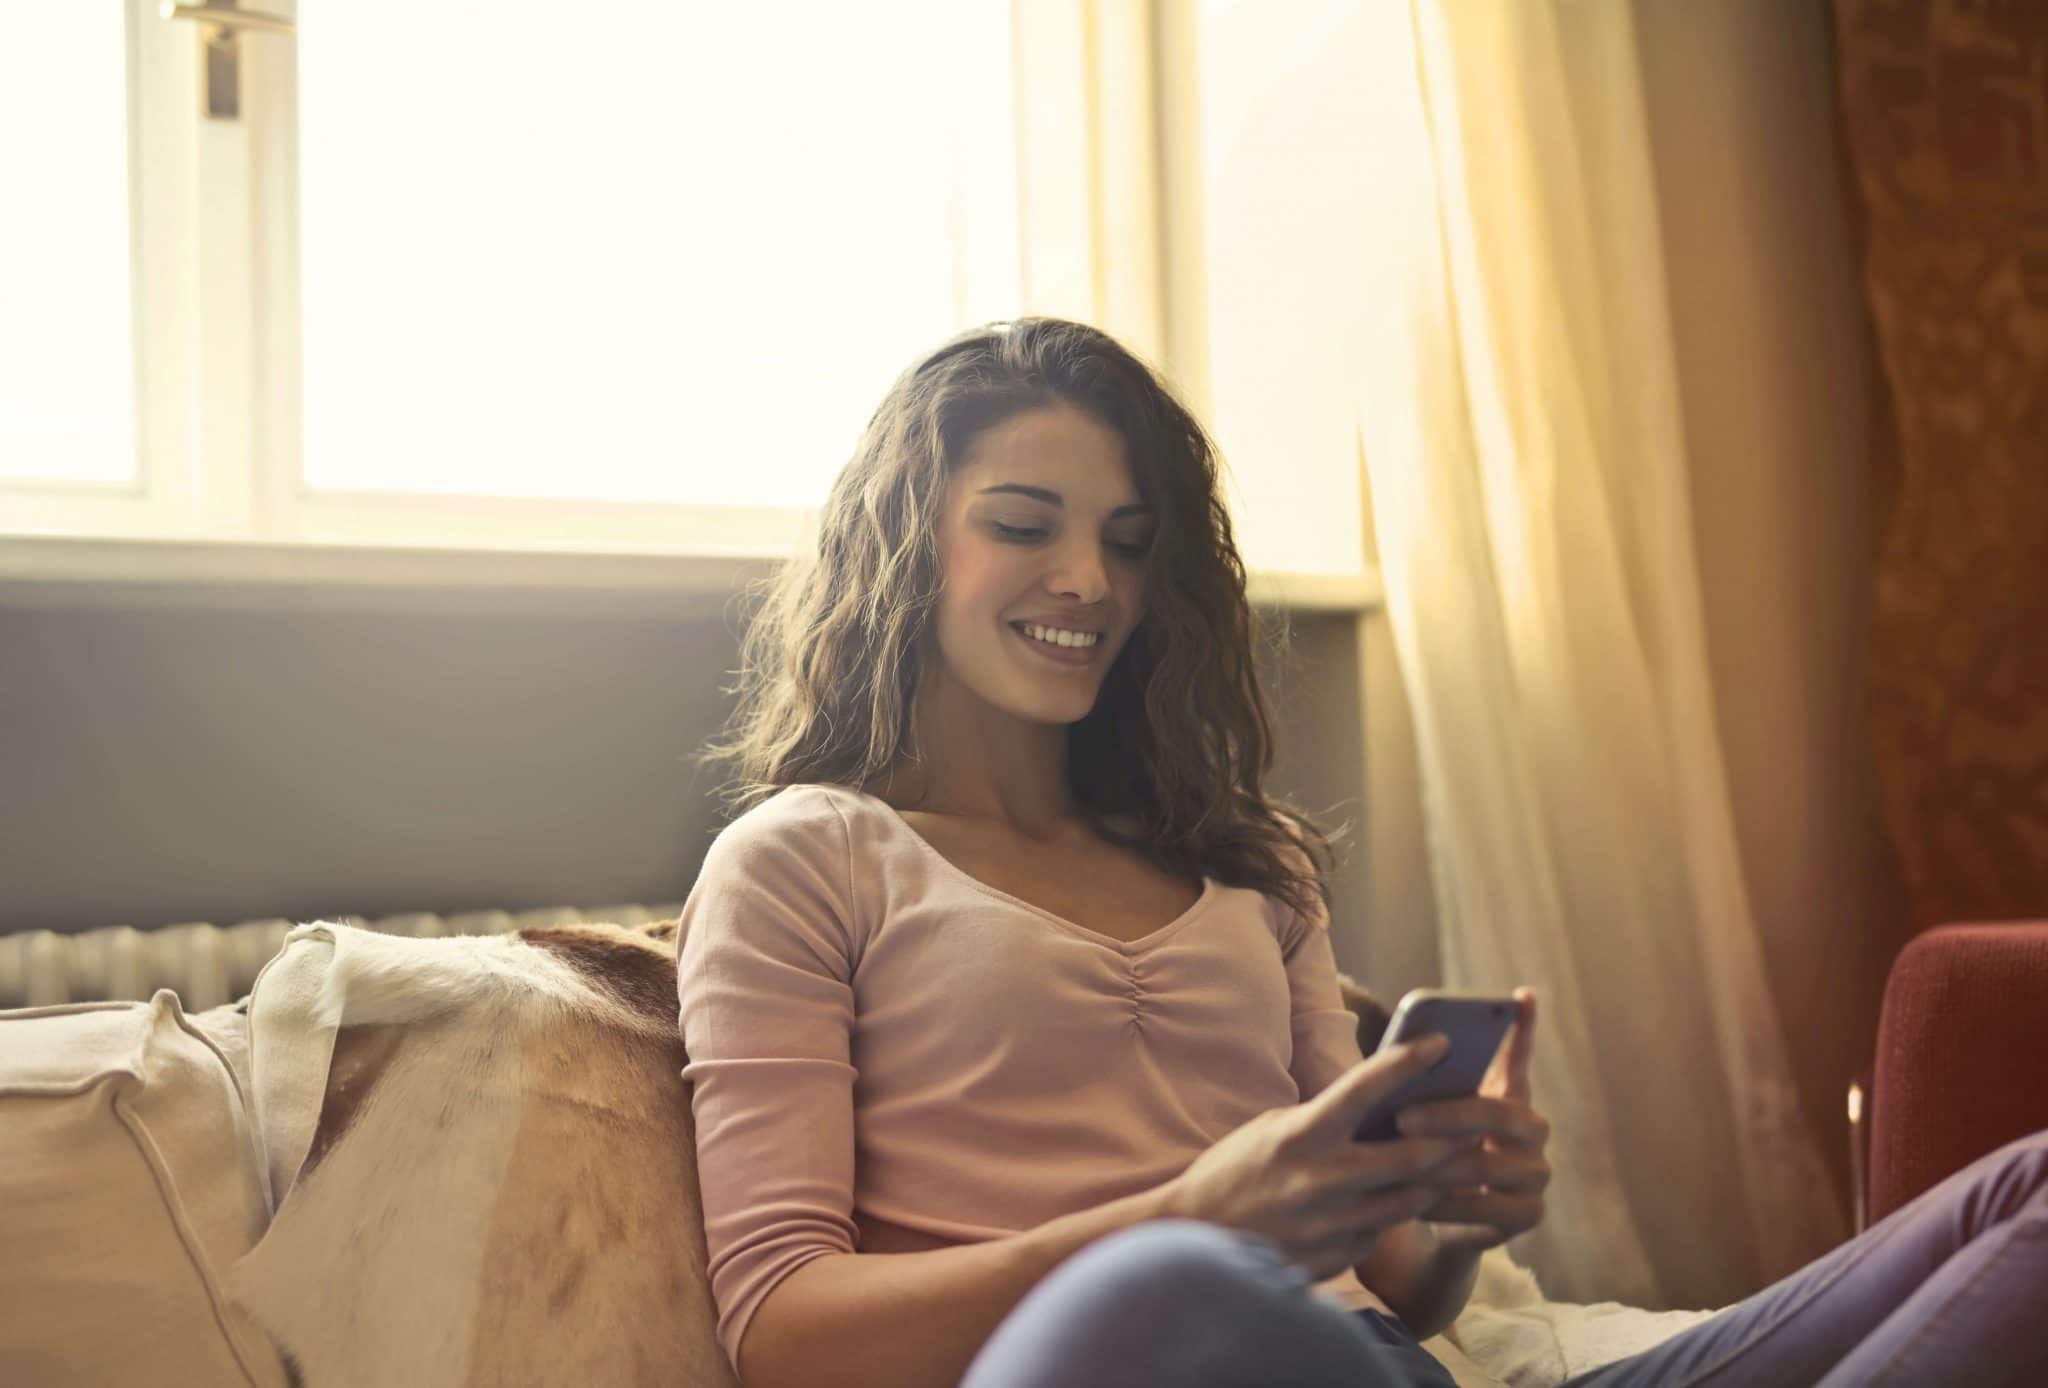 Woman smiling looking at her phone on couch